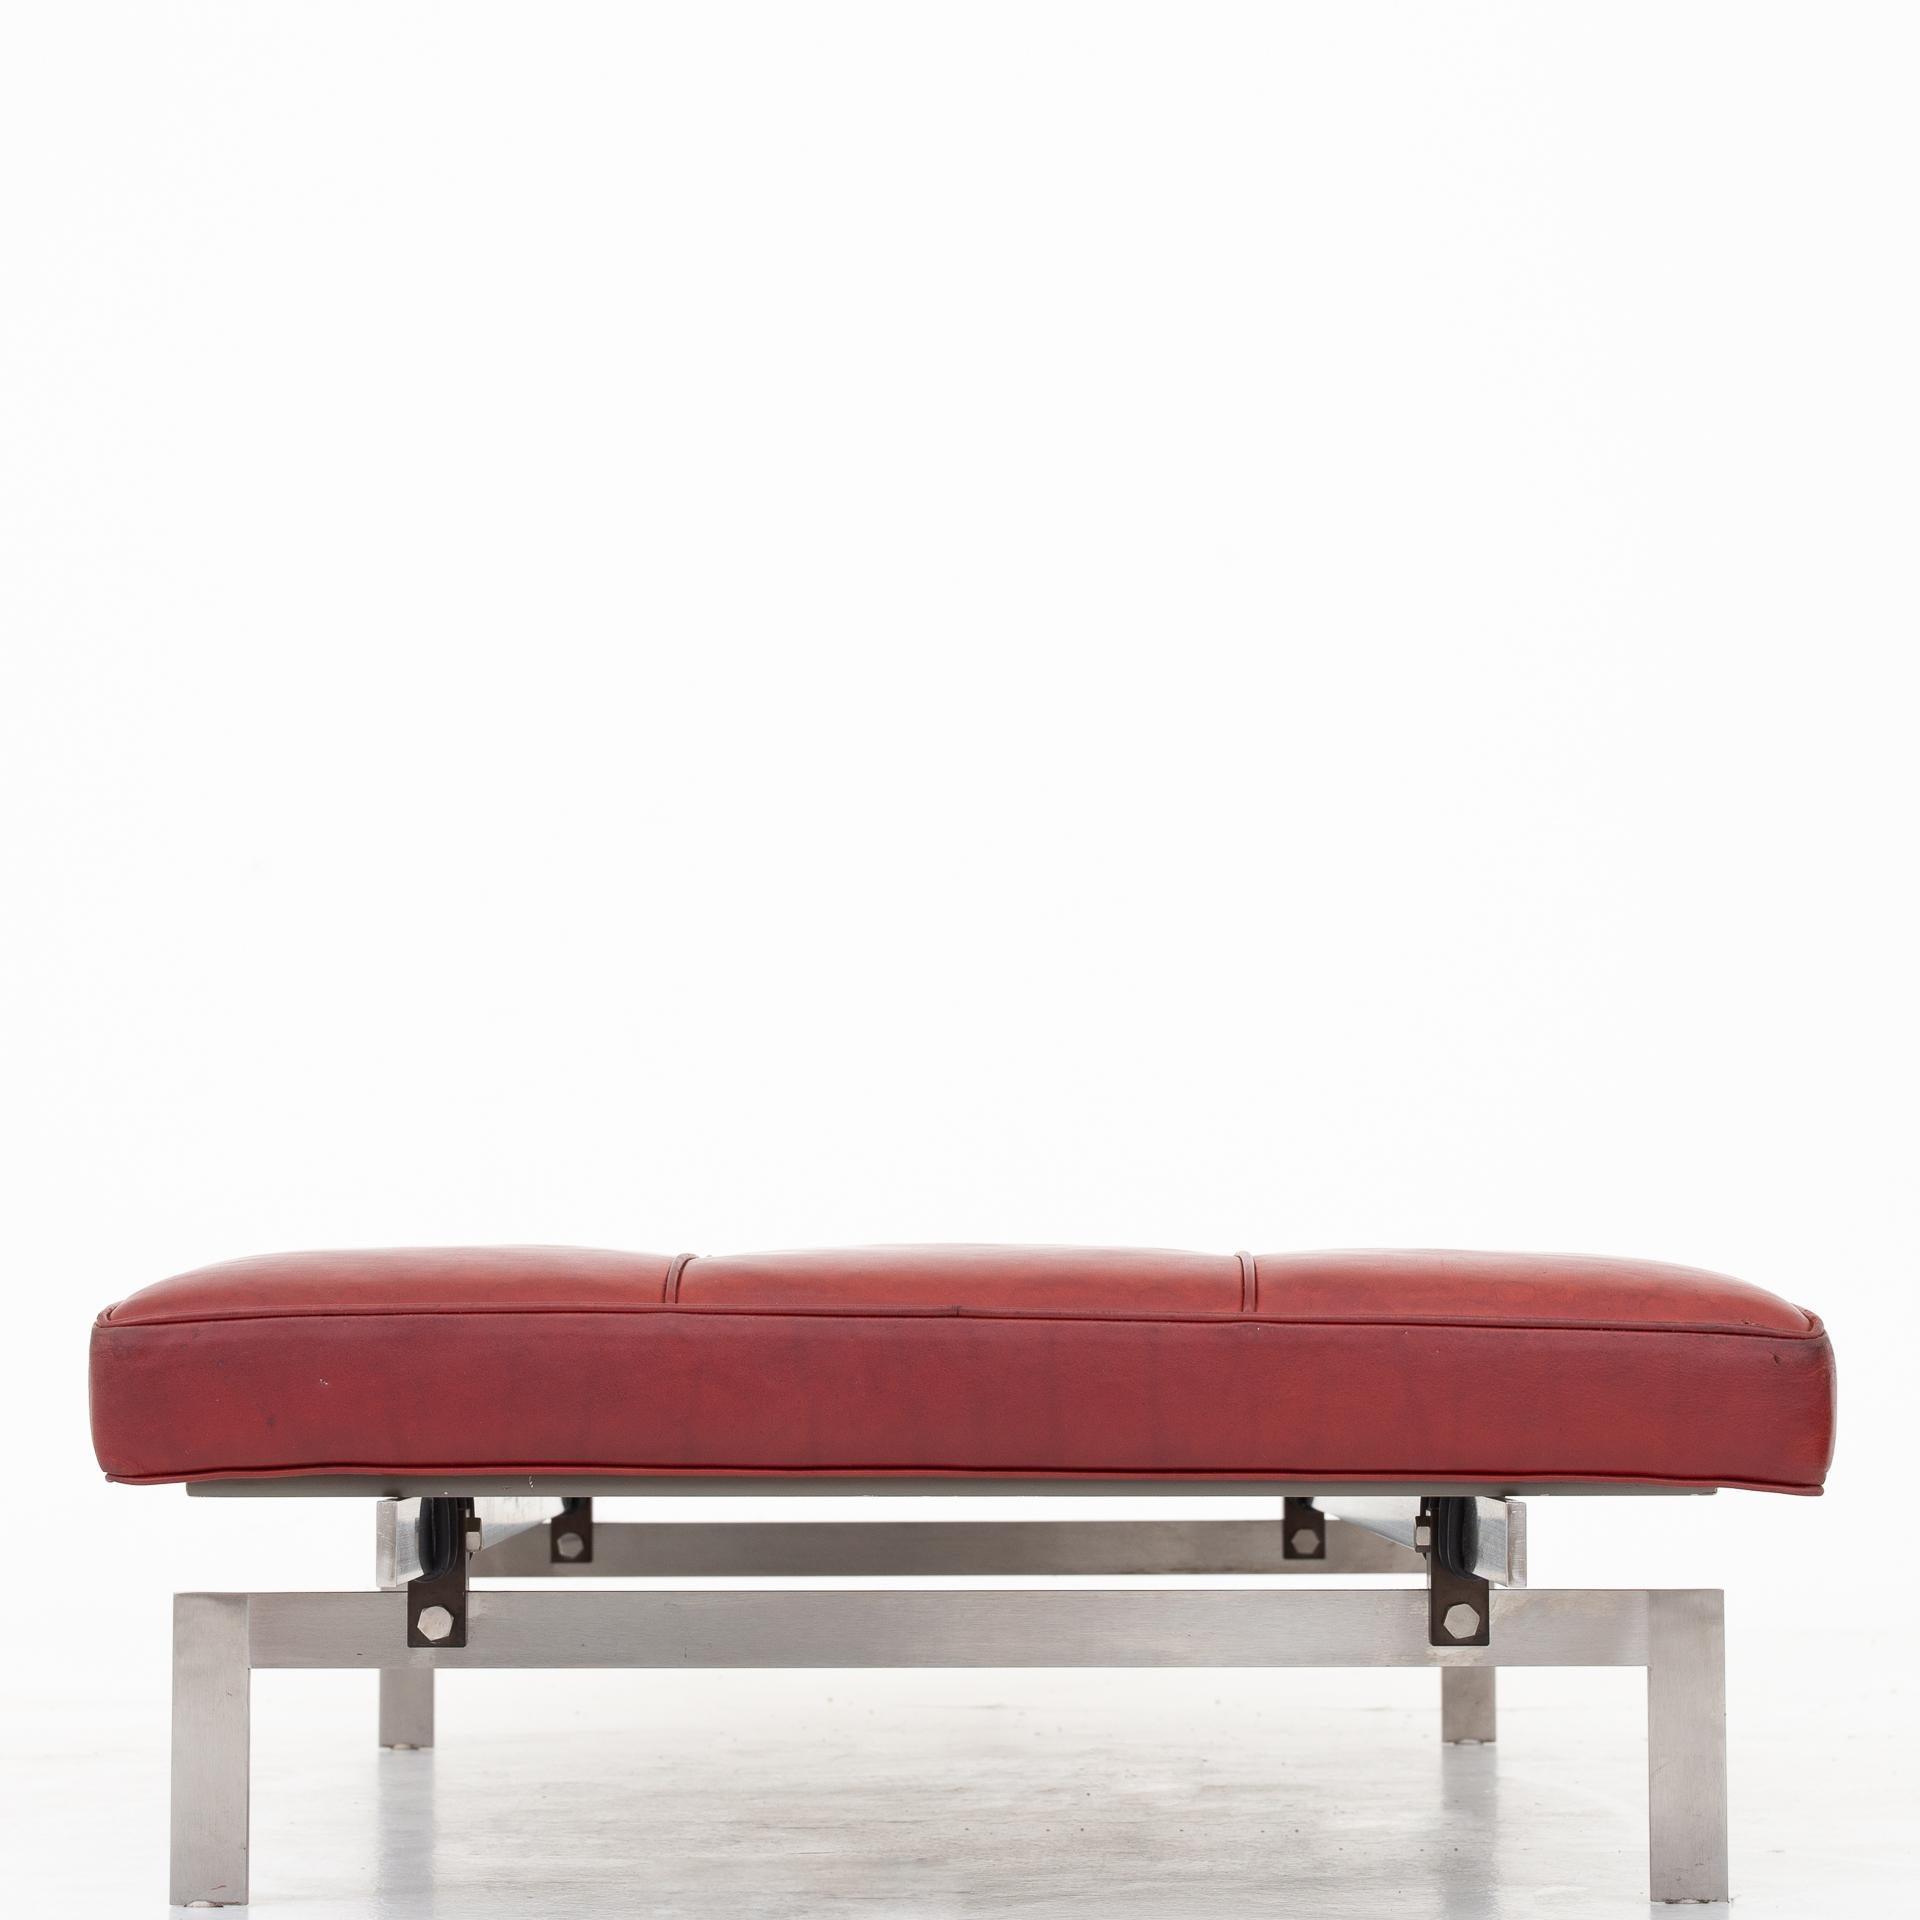 PK 80 daybed in Indian red leather on a frame of brushed steel. Maker Fritz Hansen.